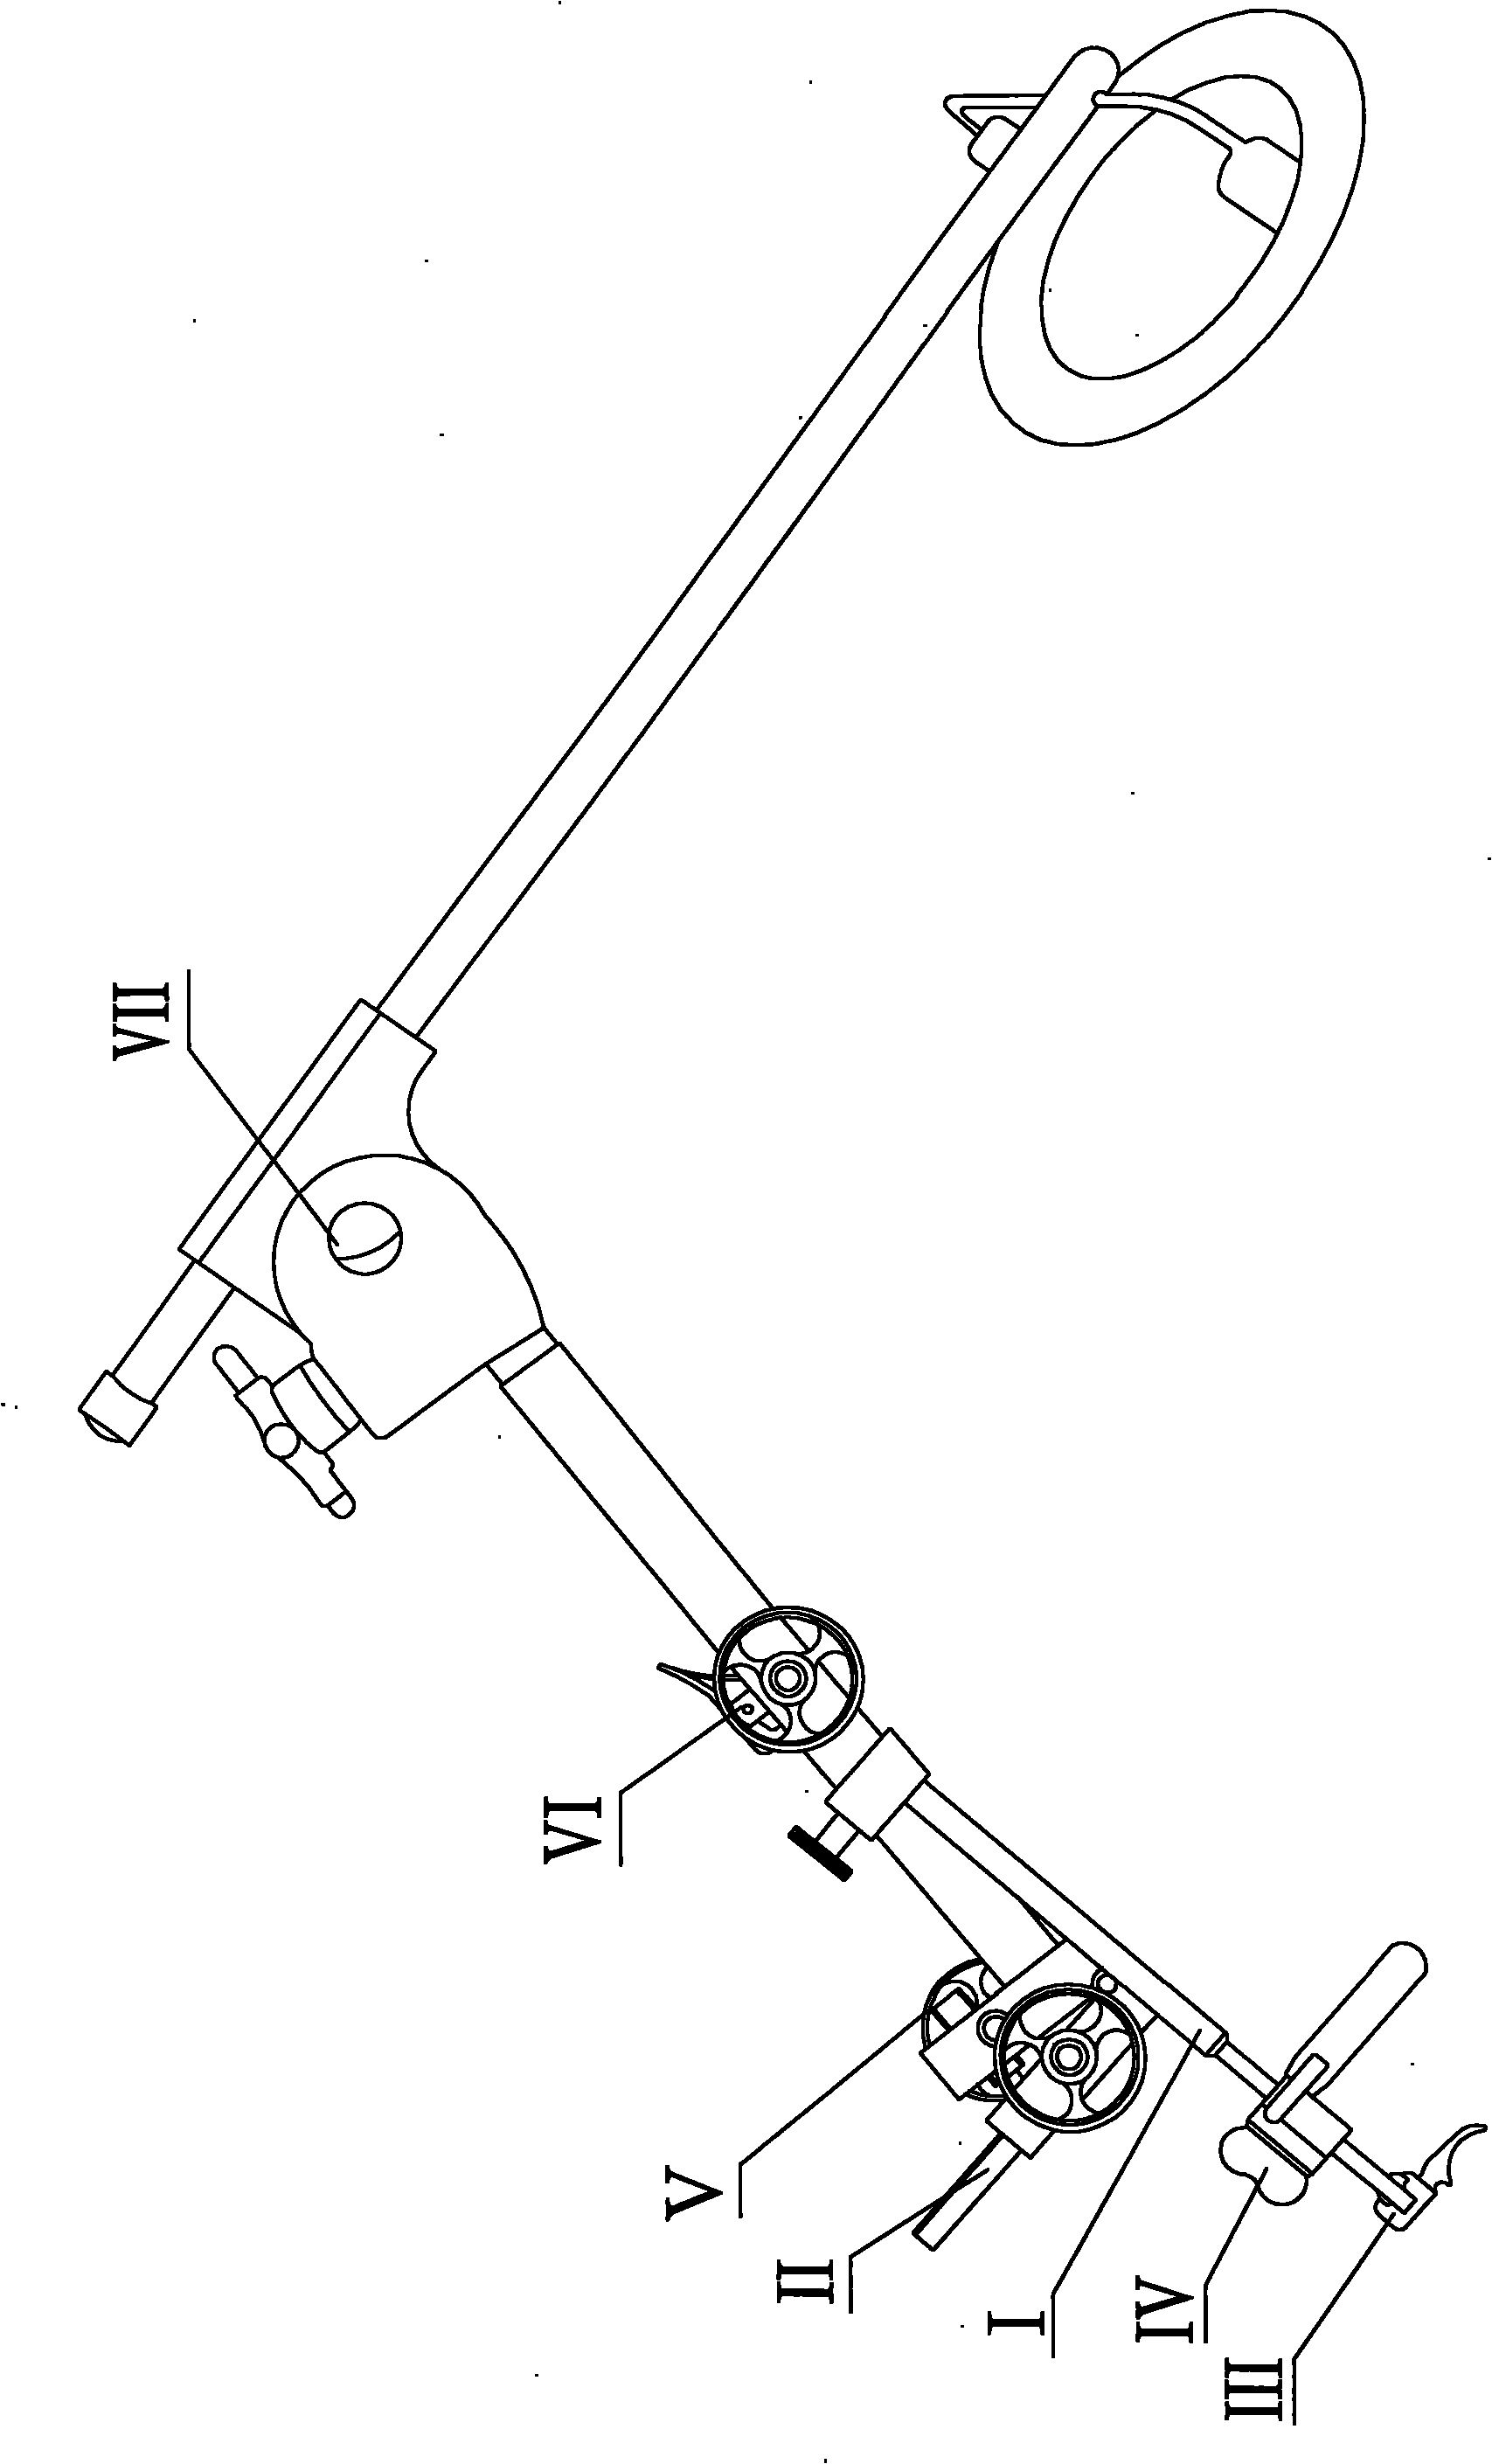 Multifunctional supporting device special for curing throat diseases of human body